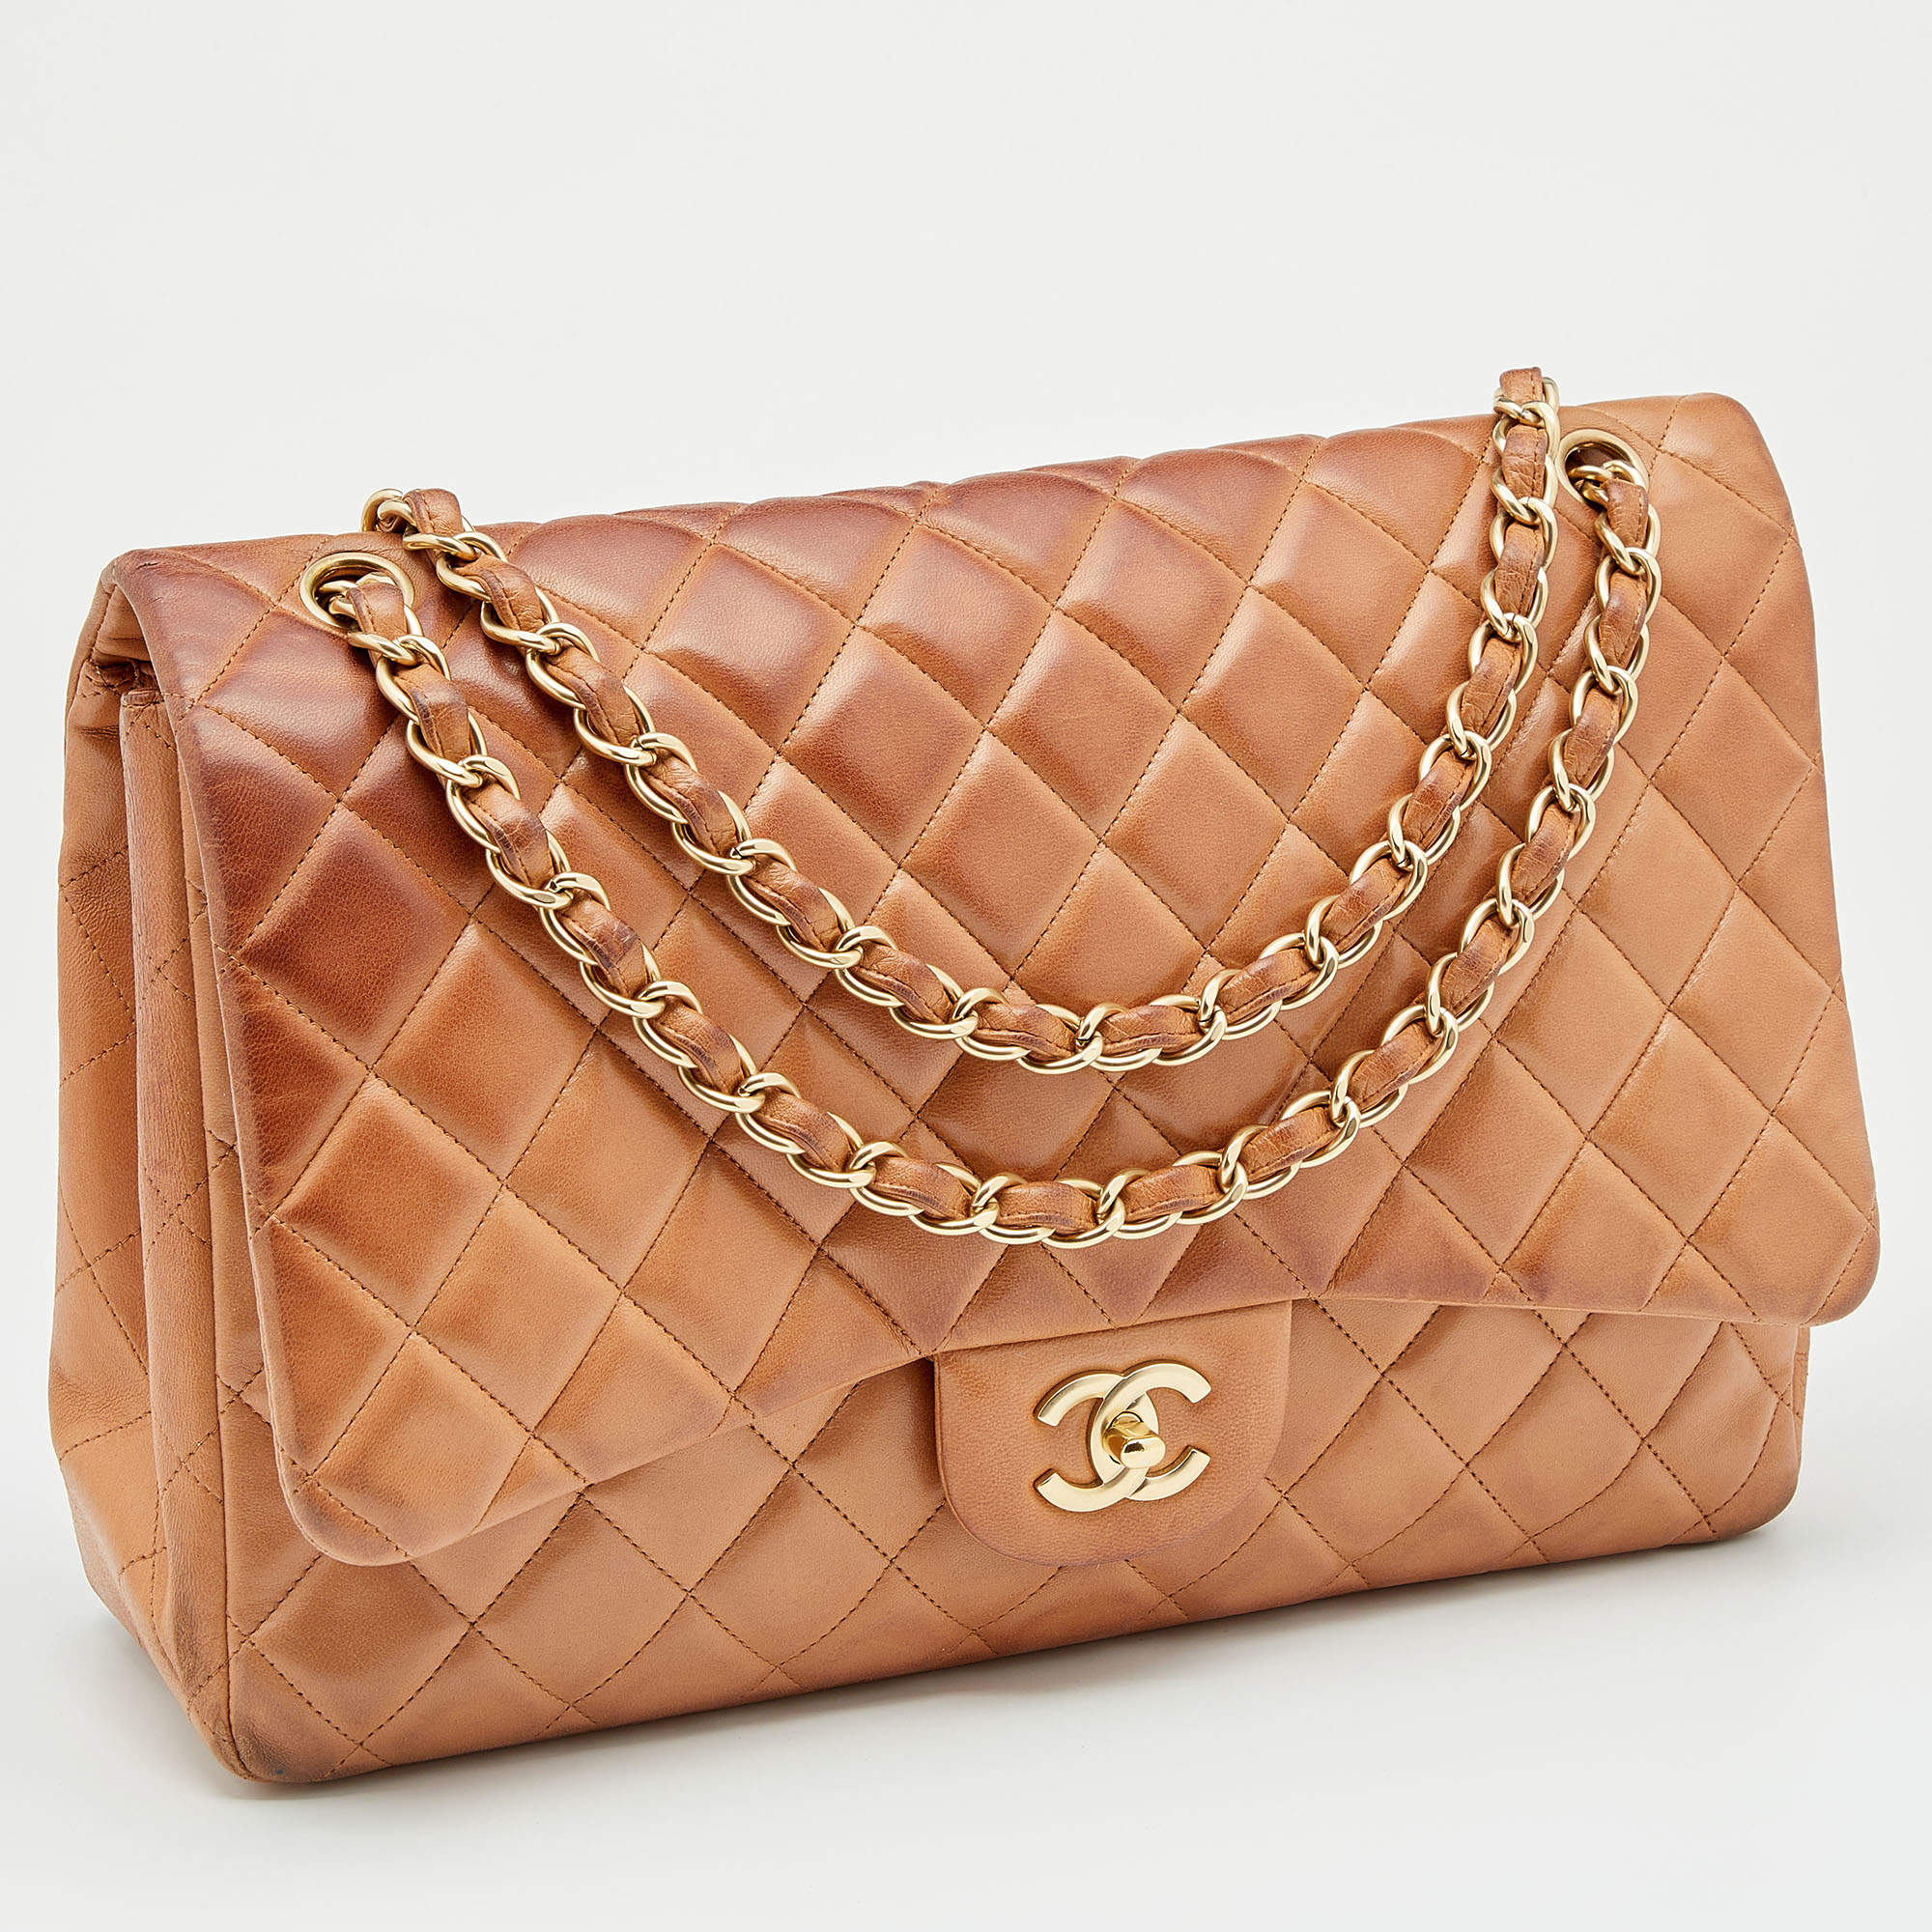 Chanel Caramel Quilted Caviar Leather Maxi Classic Double Flap Bag Chanel